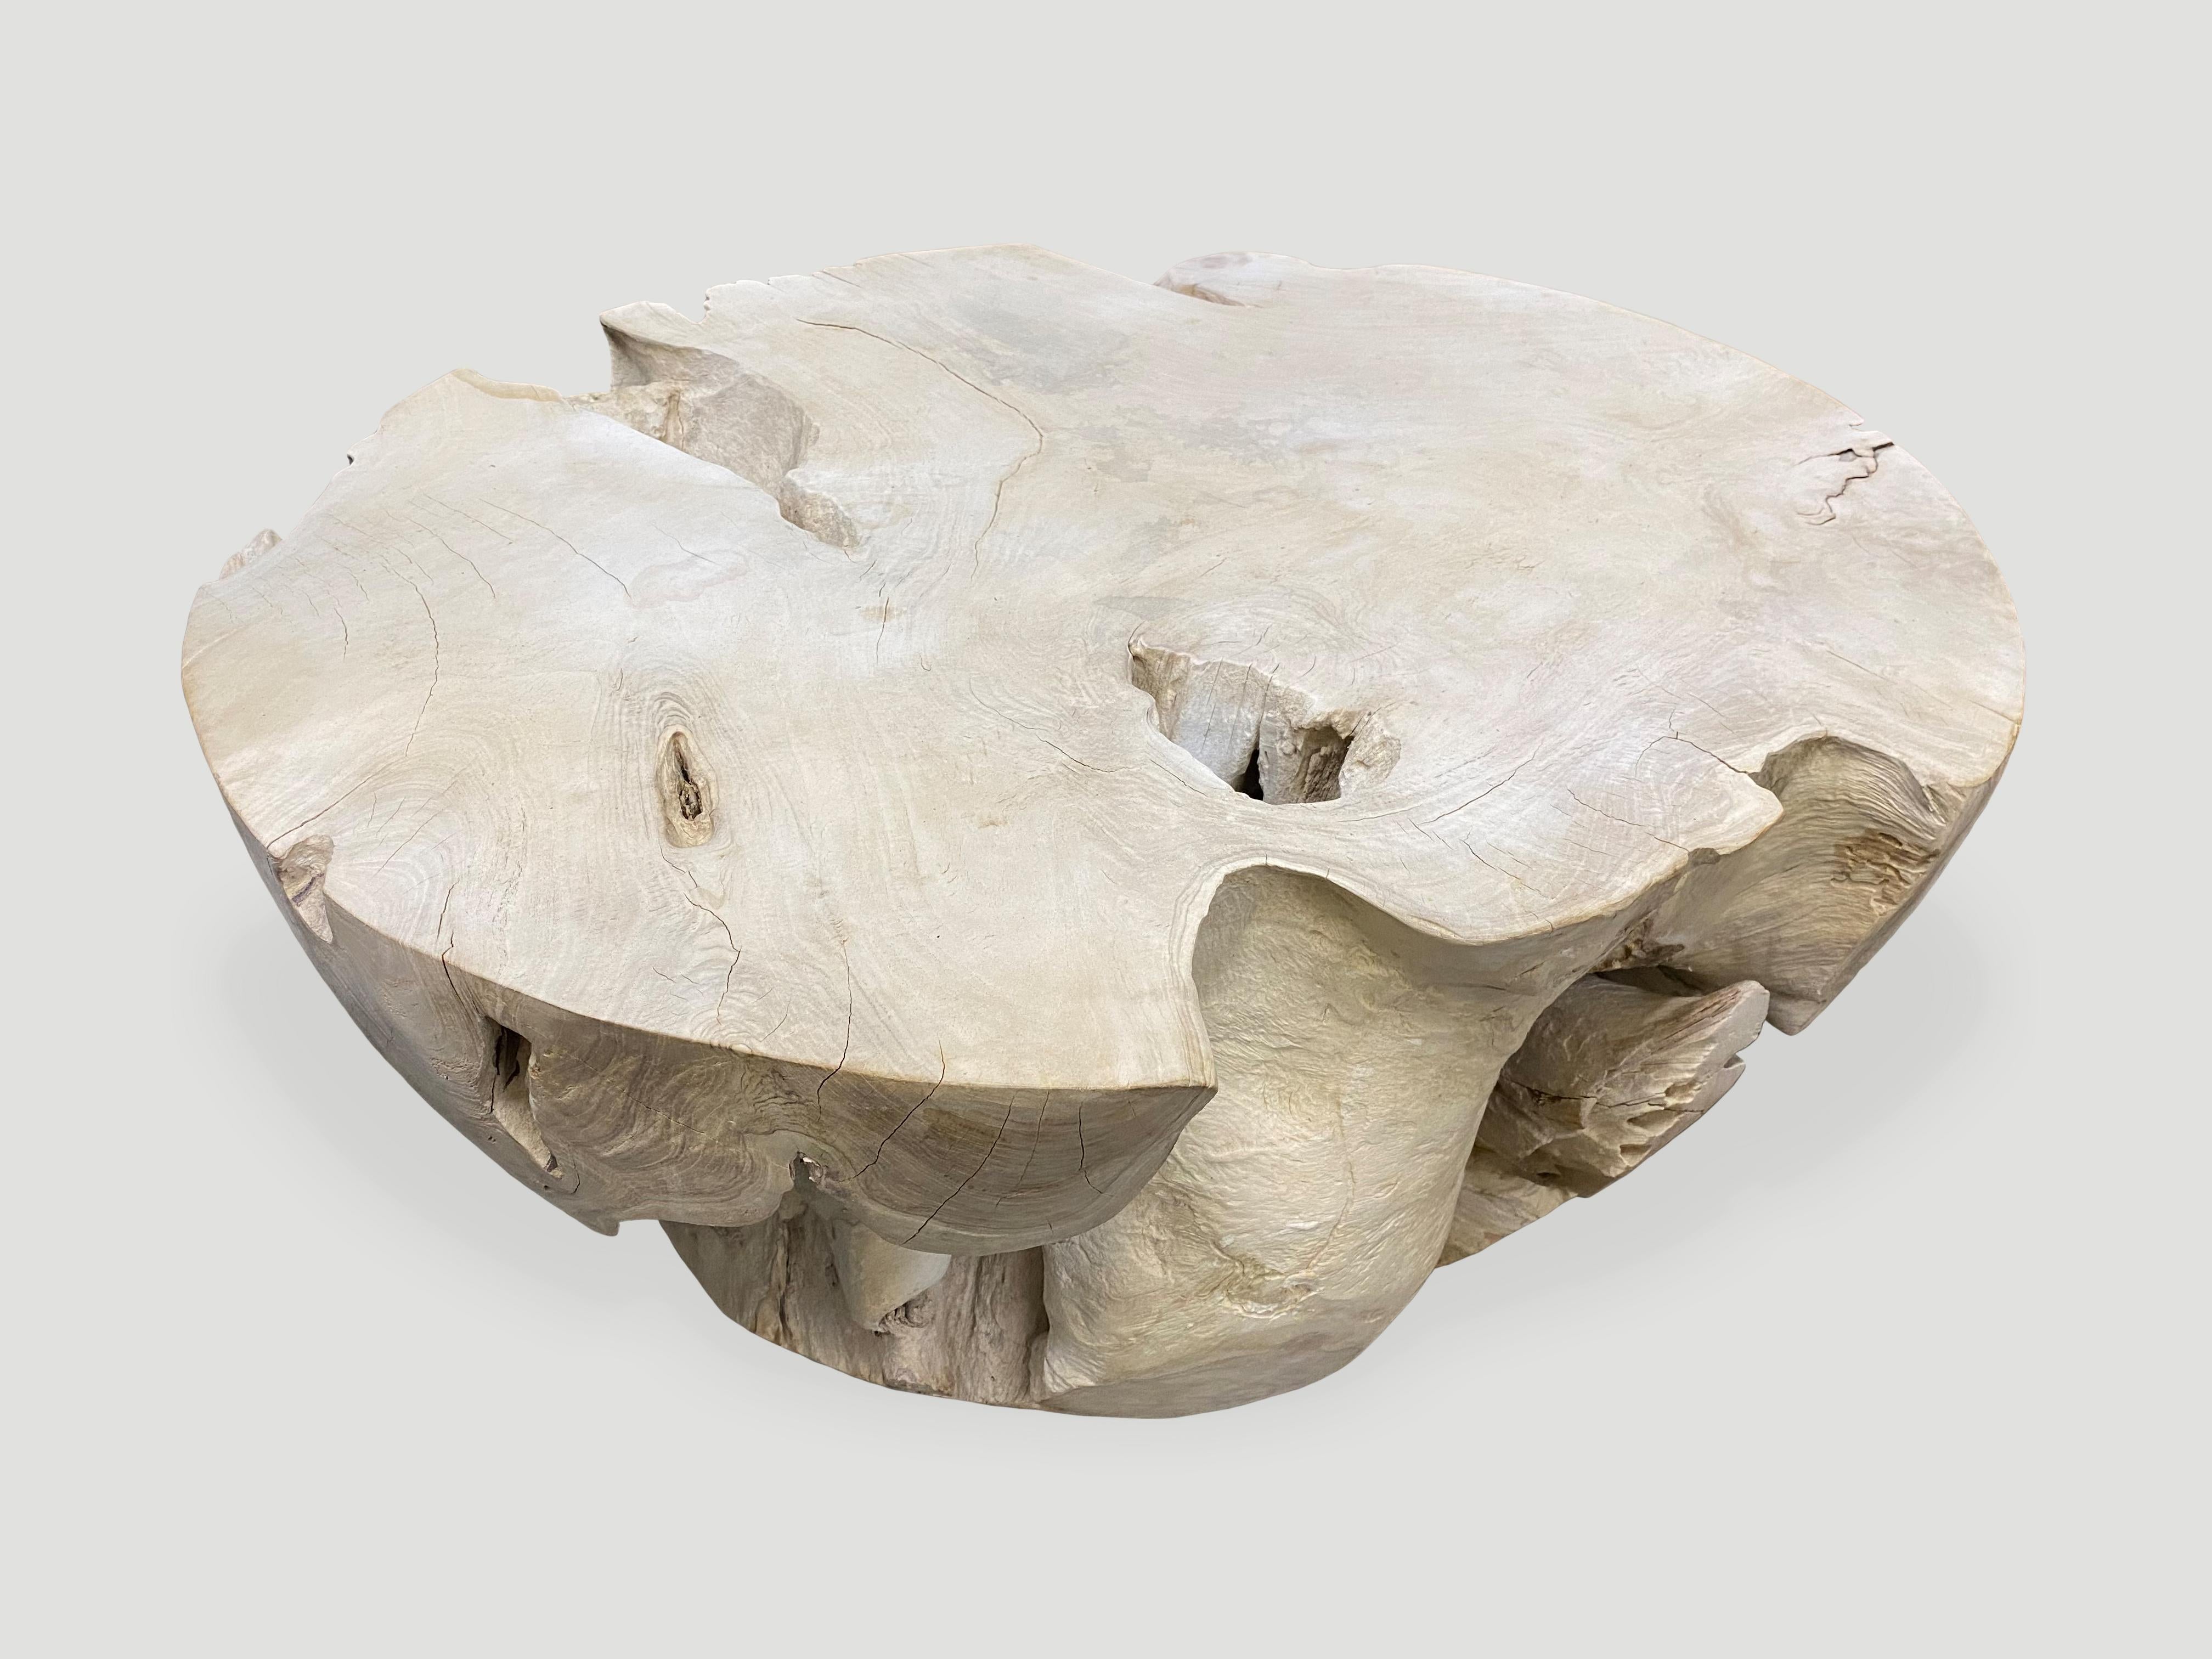 Organic reclaimed teak wood round coffee table, bleached with a light white washed finish revealing the beautiful grain in the wood. We can also produce this shape charred or natural teak. Please inquire.

The St. Barts Collection features an